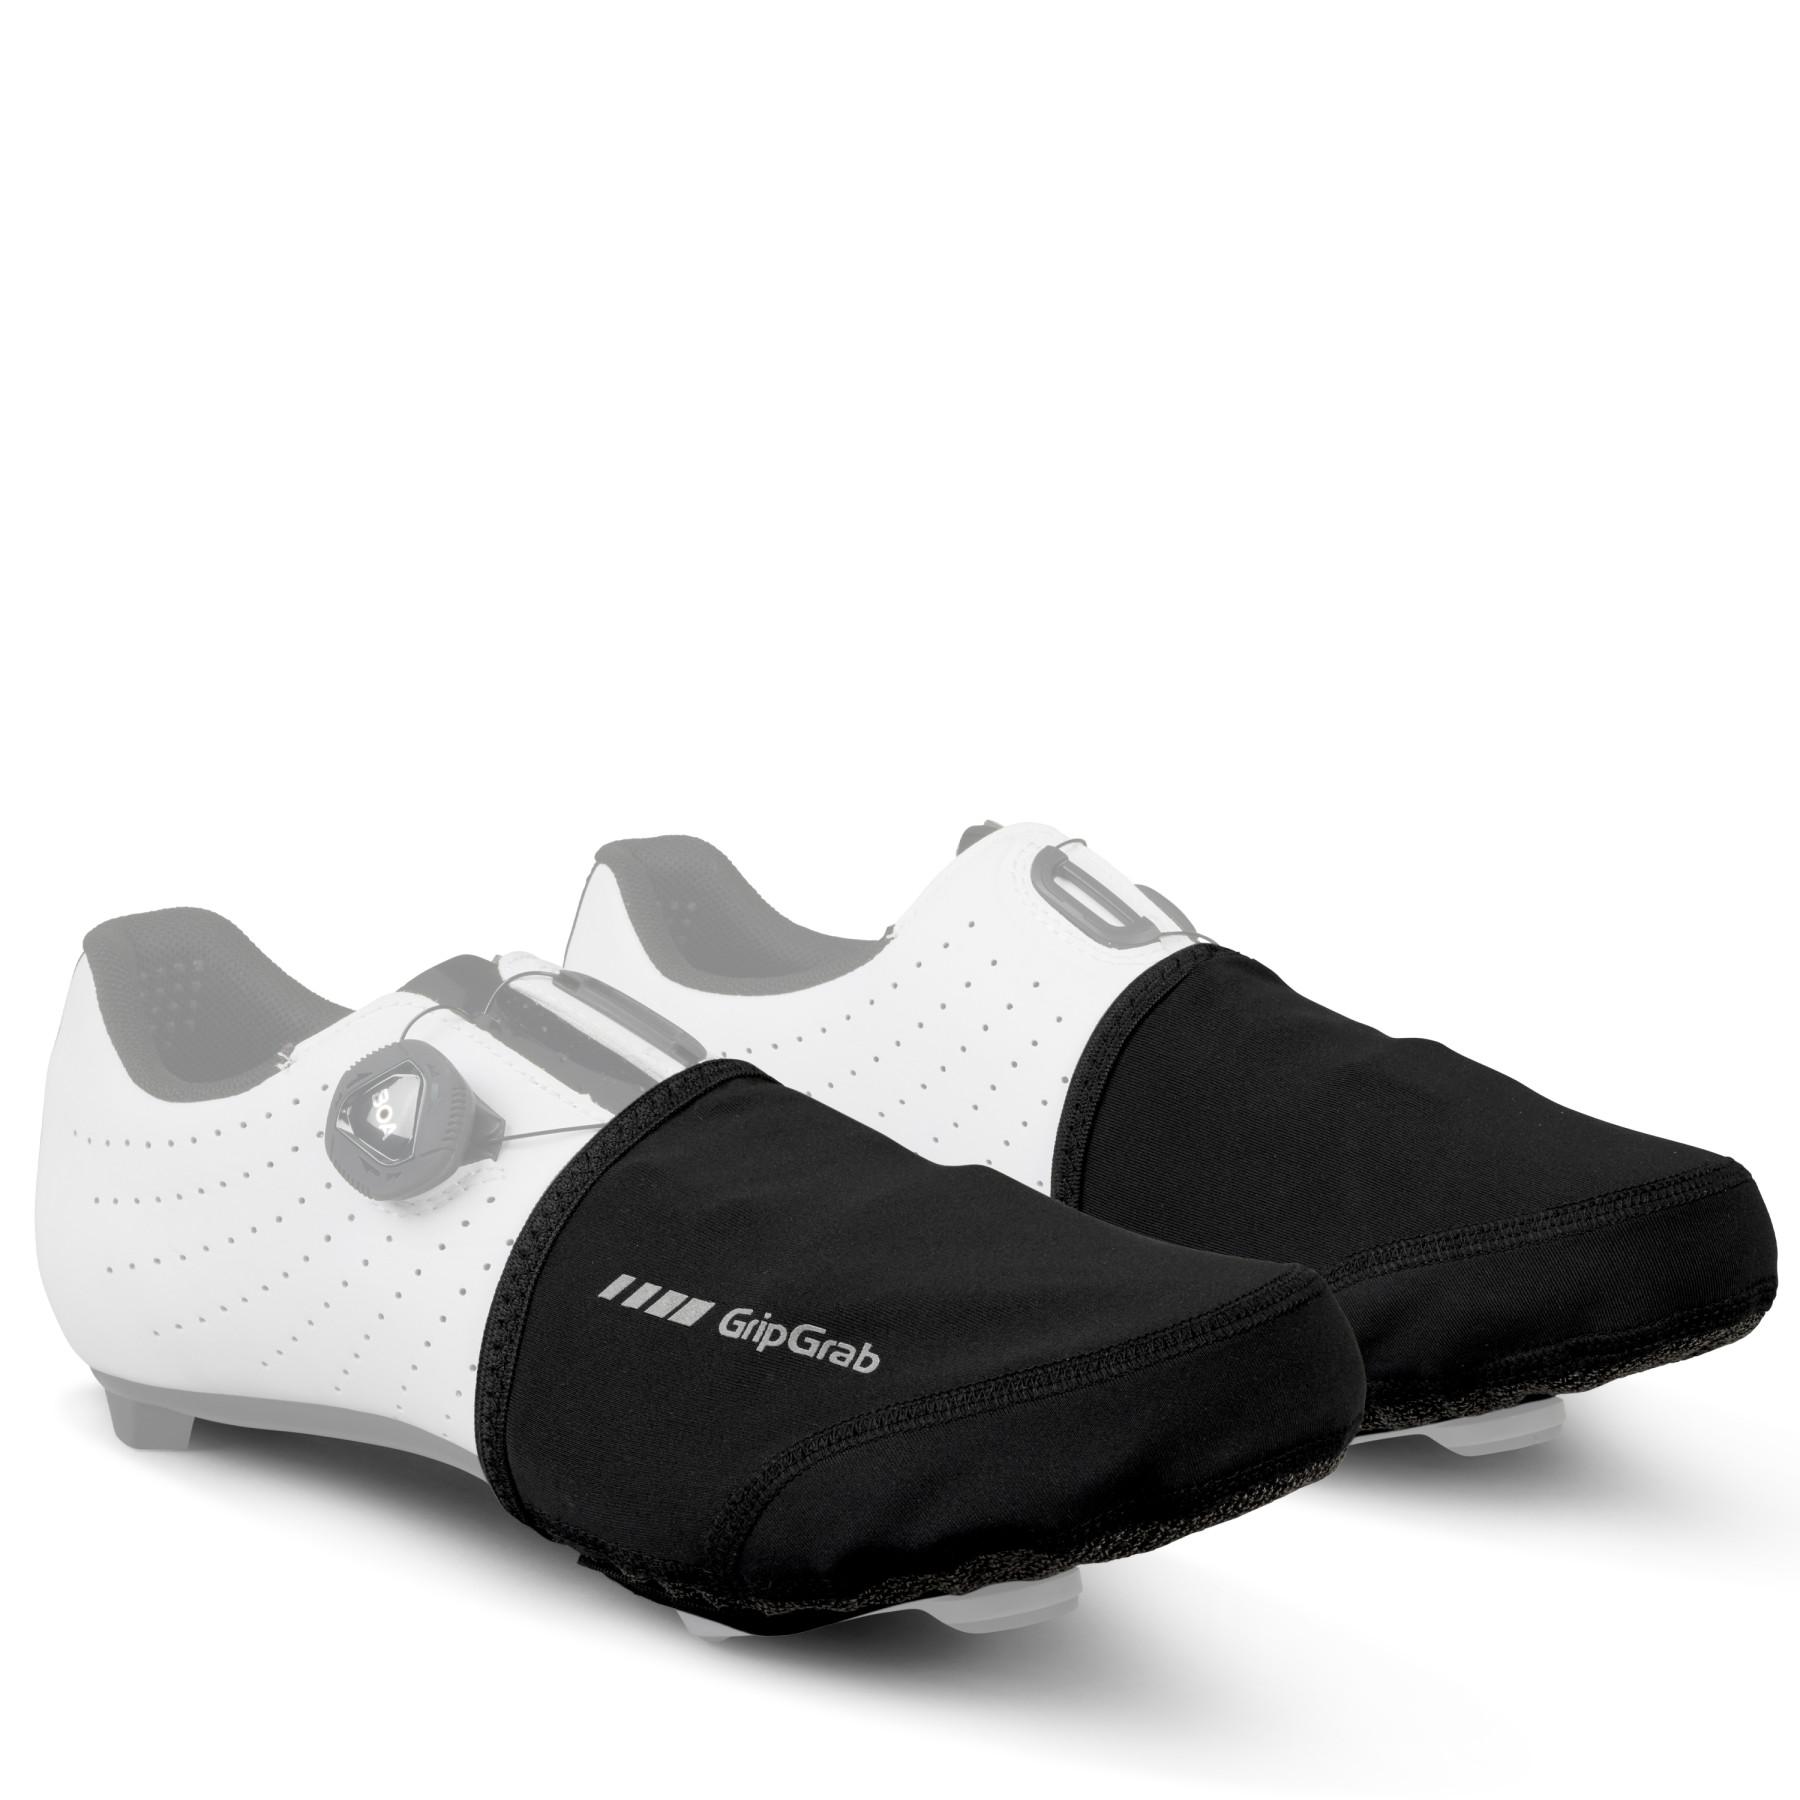 Gripgrab Windproof Toe Cover - Black